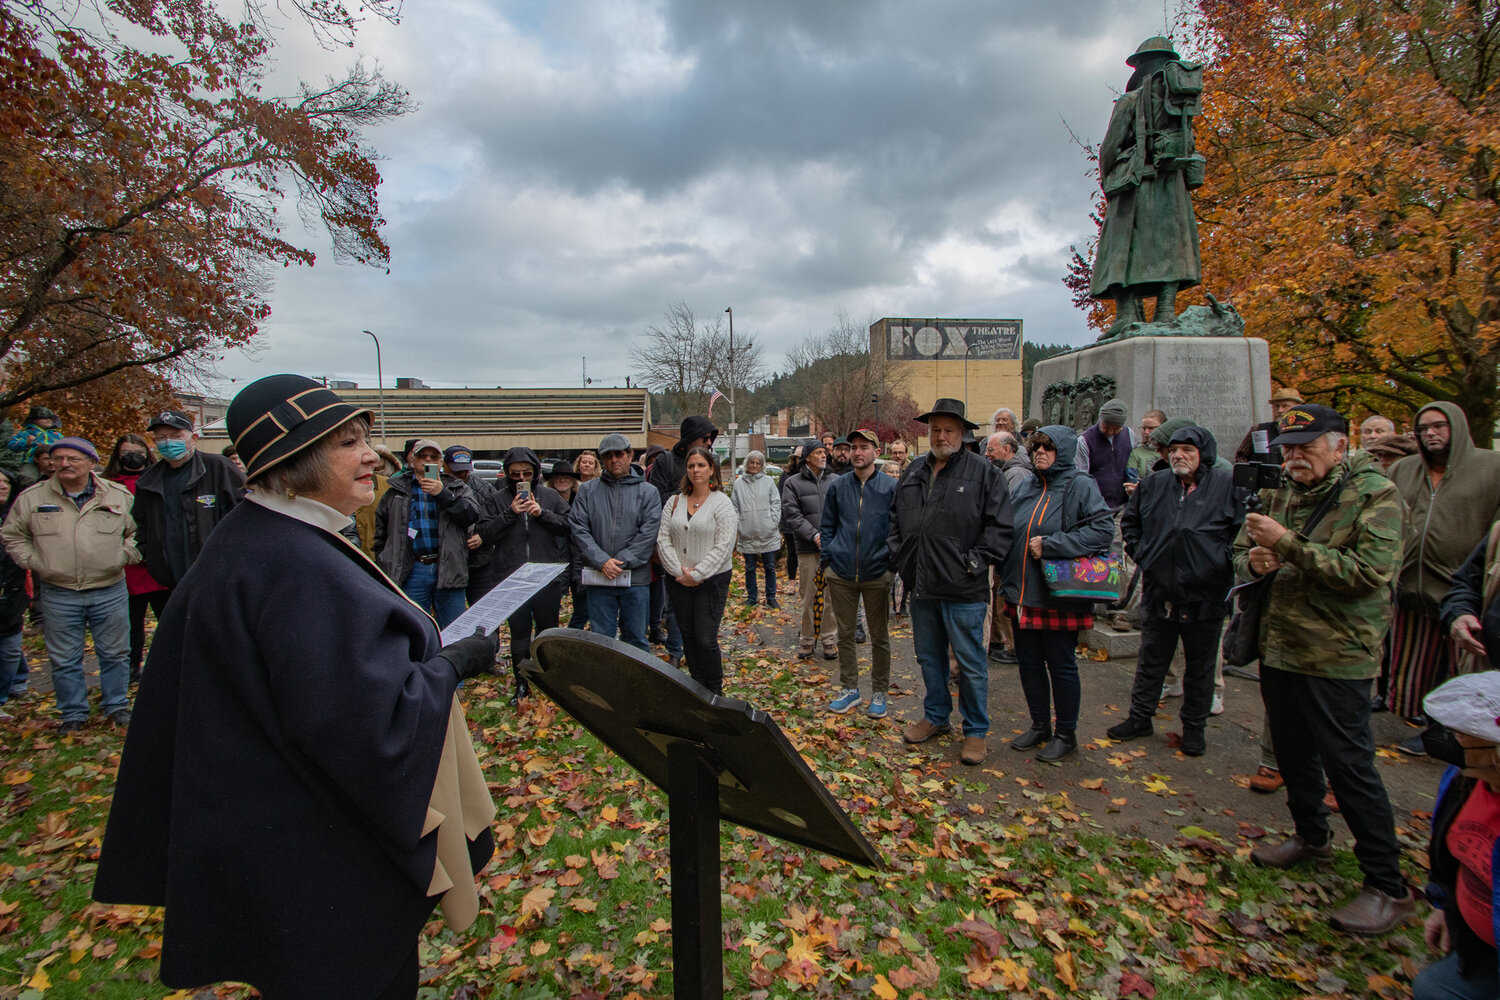 IWW member Mary Garrison reads the poem "The Last Soldier" by J. Augustus Smith during the dedication ceremony of a plaque in Centralia's George Washington Park on Saturday, Nov. 11, for the IWW union victims of the Centralia Tragedy of 1919.